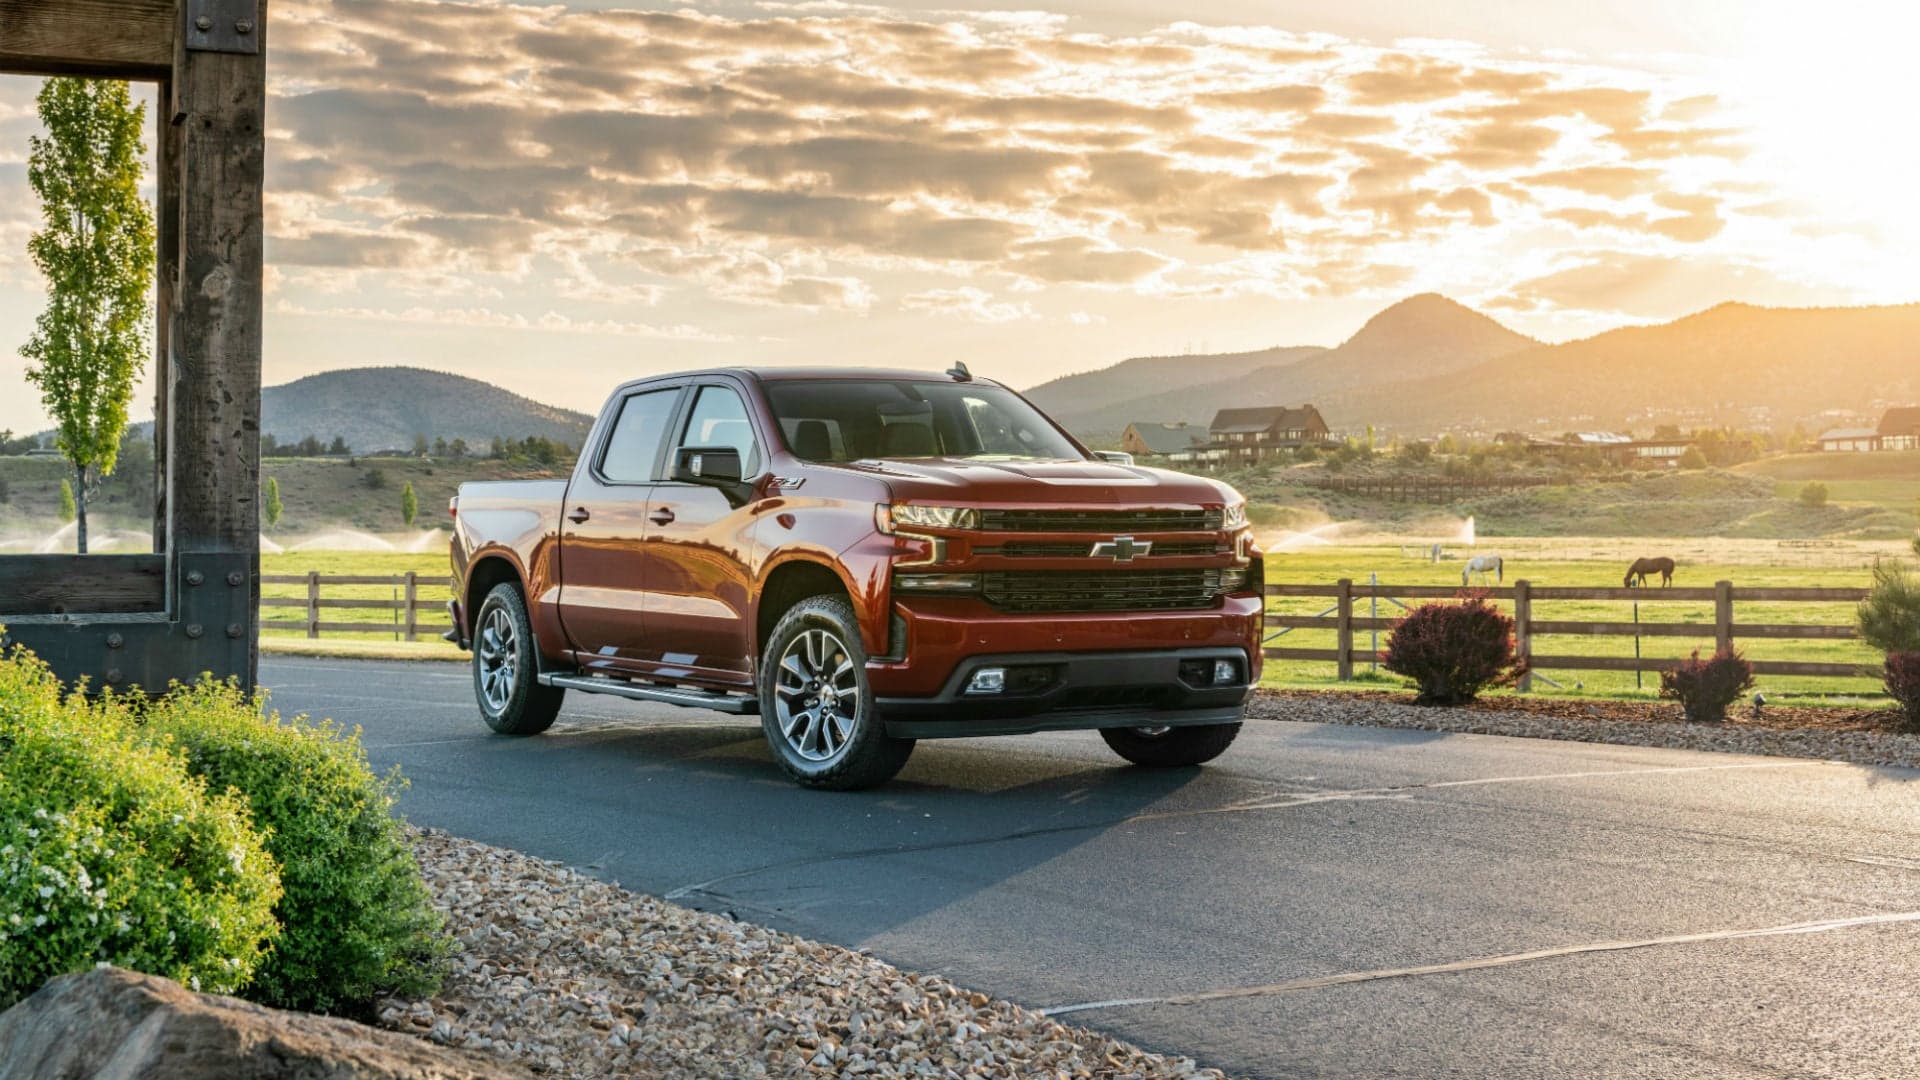 GM Working to Boost Chevy Silverado 1500 Diesel Towing, Maintain Best-in-Class MPG: Report